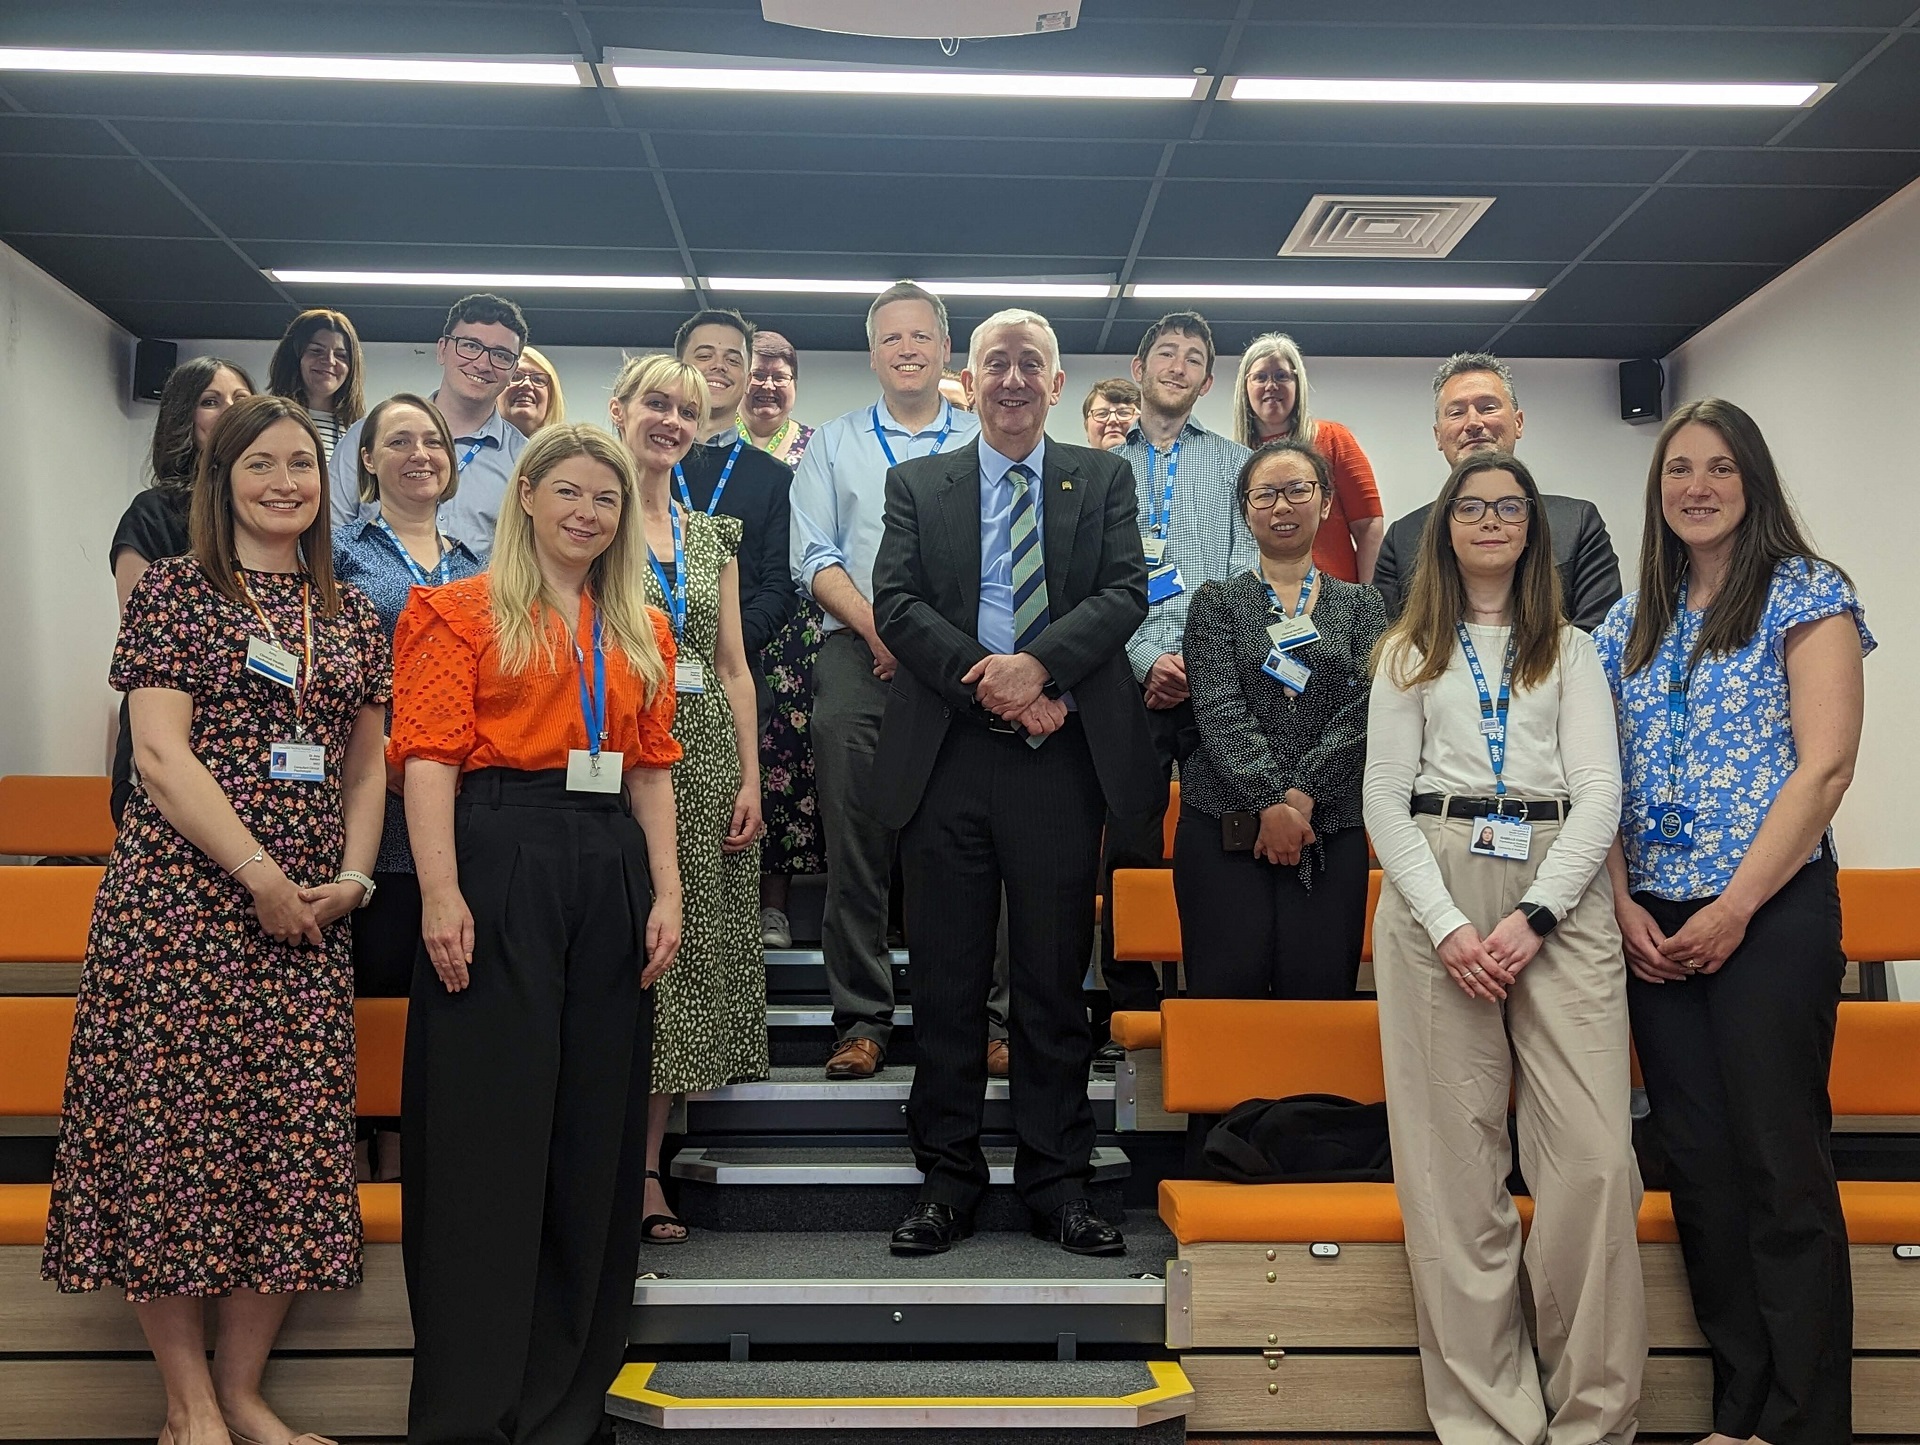 Sir Lindsay Hoyle in a group photo with a dozen or so Lancashire Teaching Hospitals employees, one of whom is Kevin McGee. They are all standing together, smiling, looking very professional.